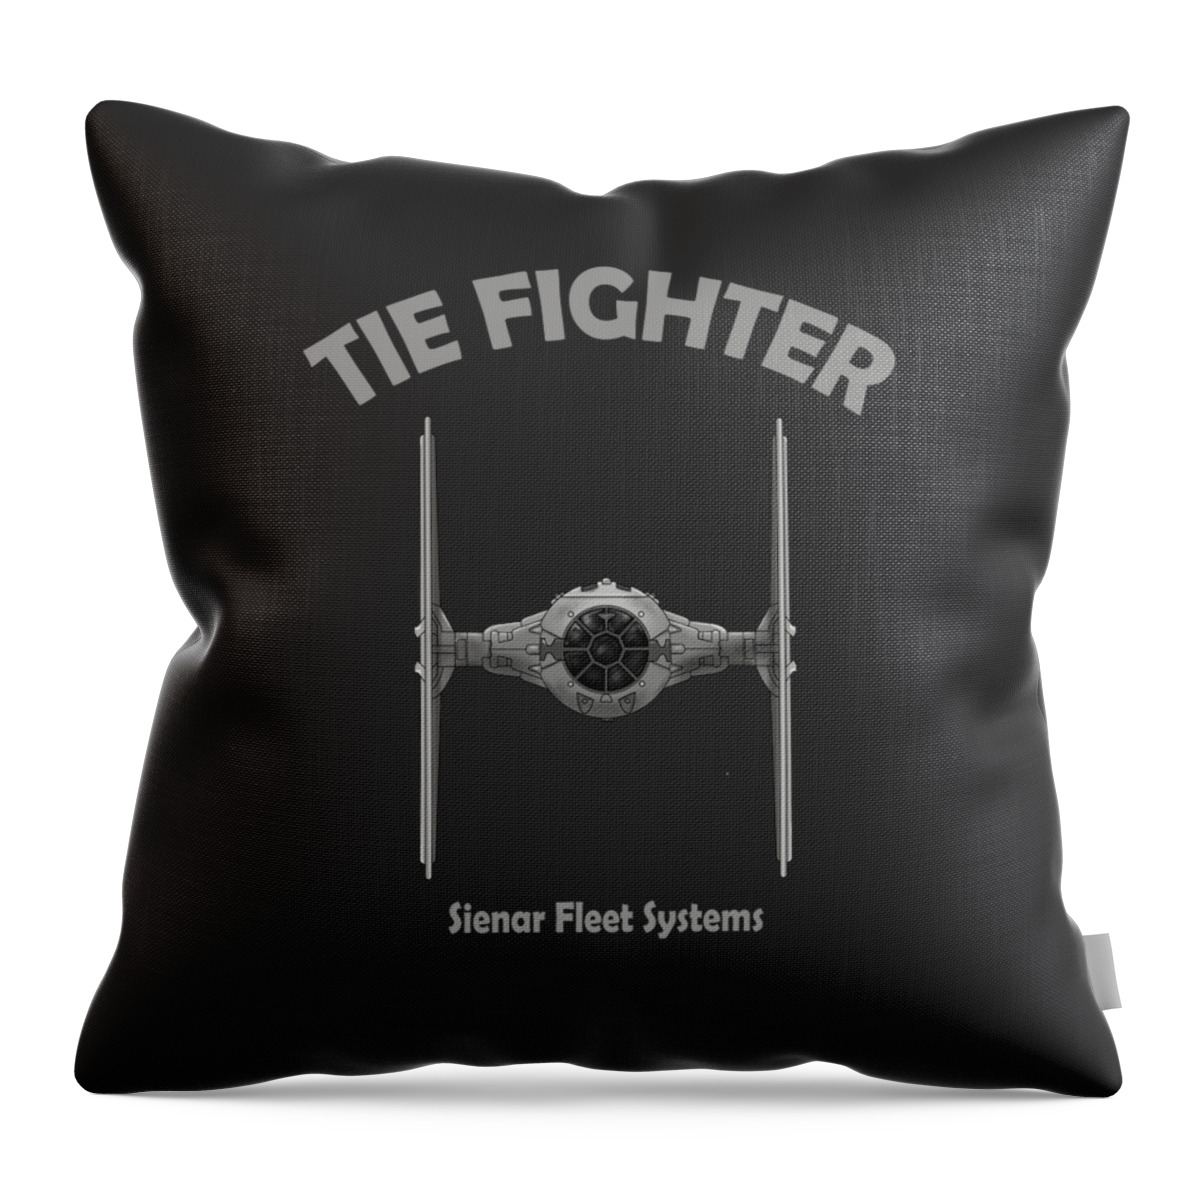 Tie Fighter Throw Pillow featuring the photograph Tie Fighter by Mark Rogan